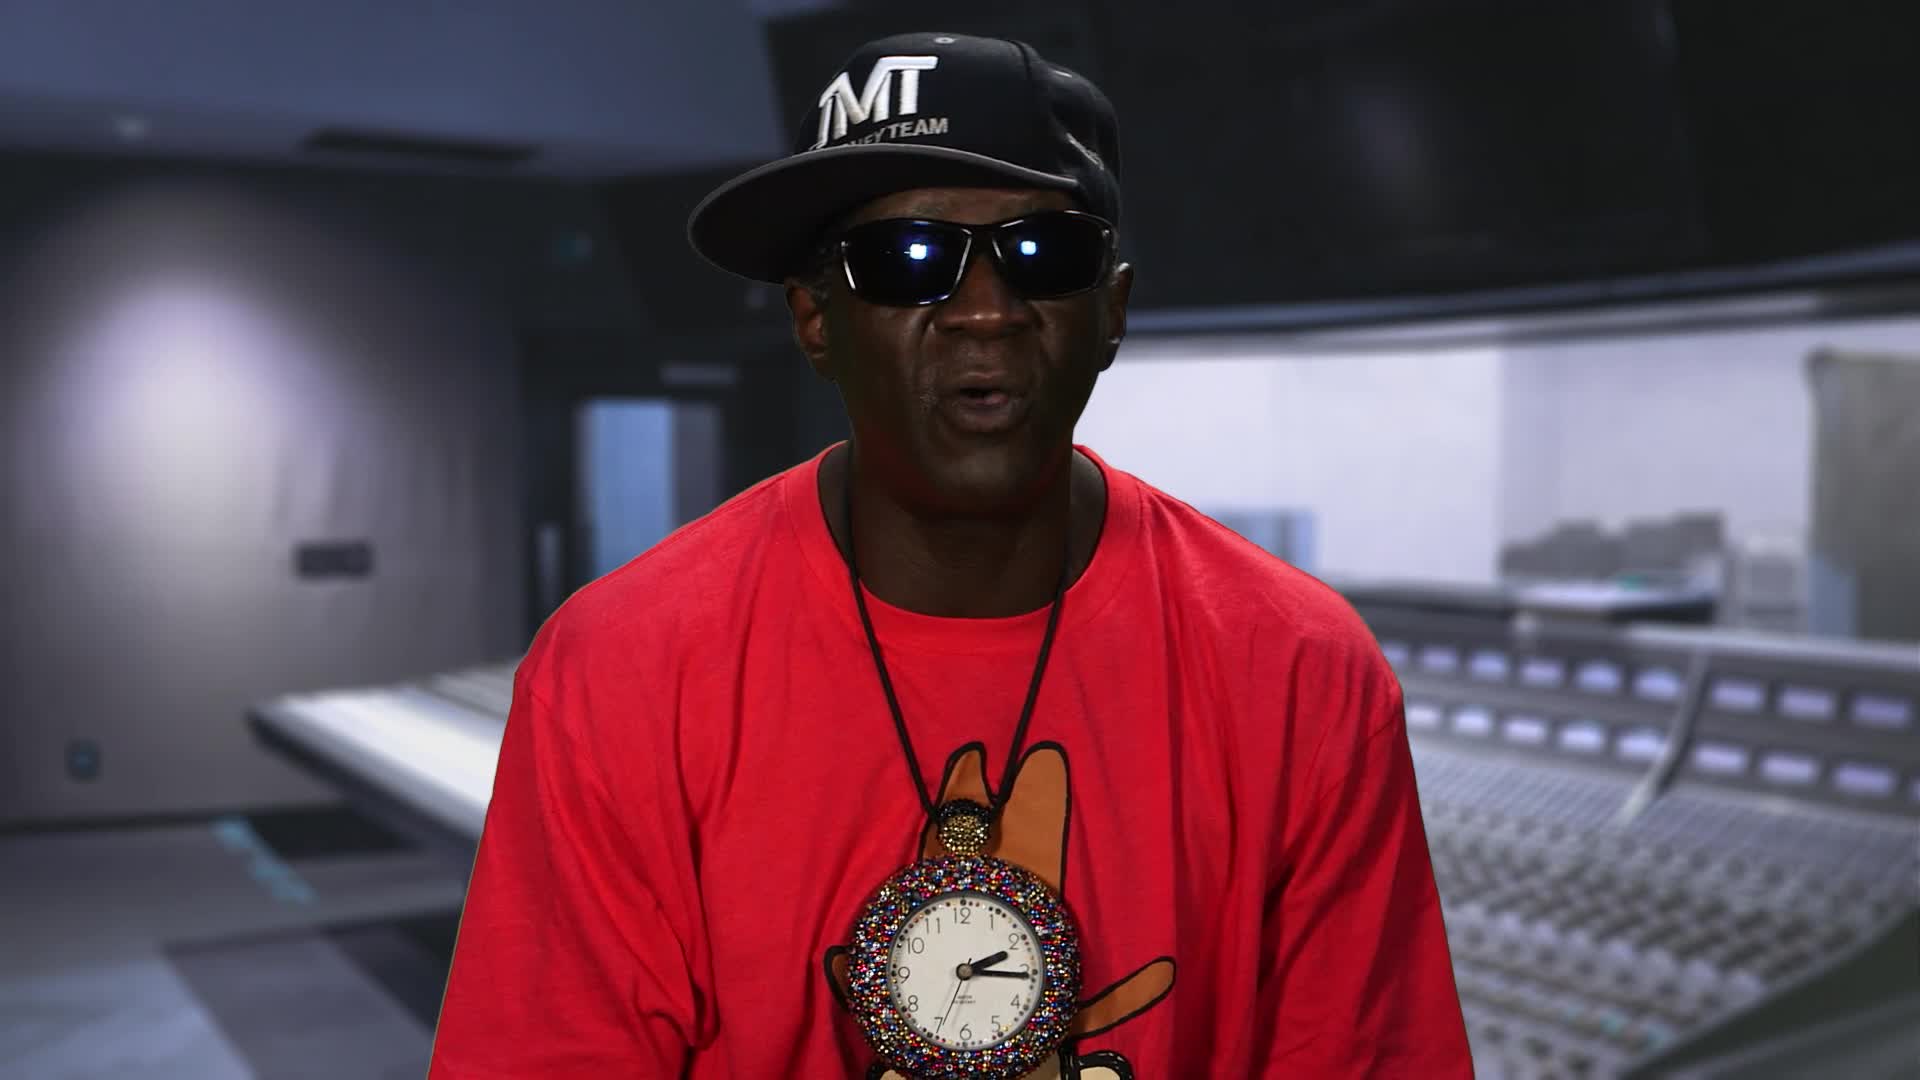 Watch Catching up with Flavor Flav! | Growing Up Hip Hop: New York Video Extras